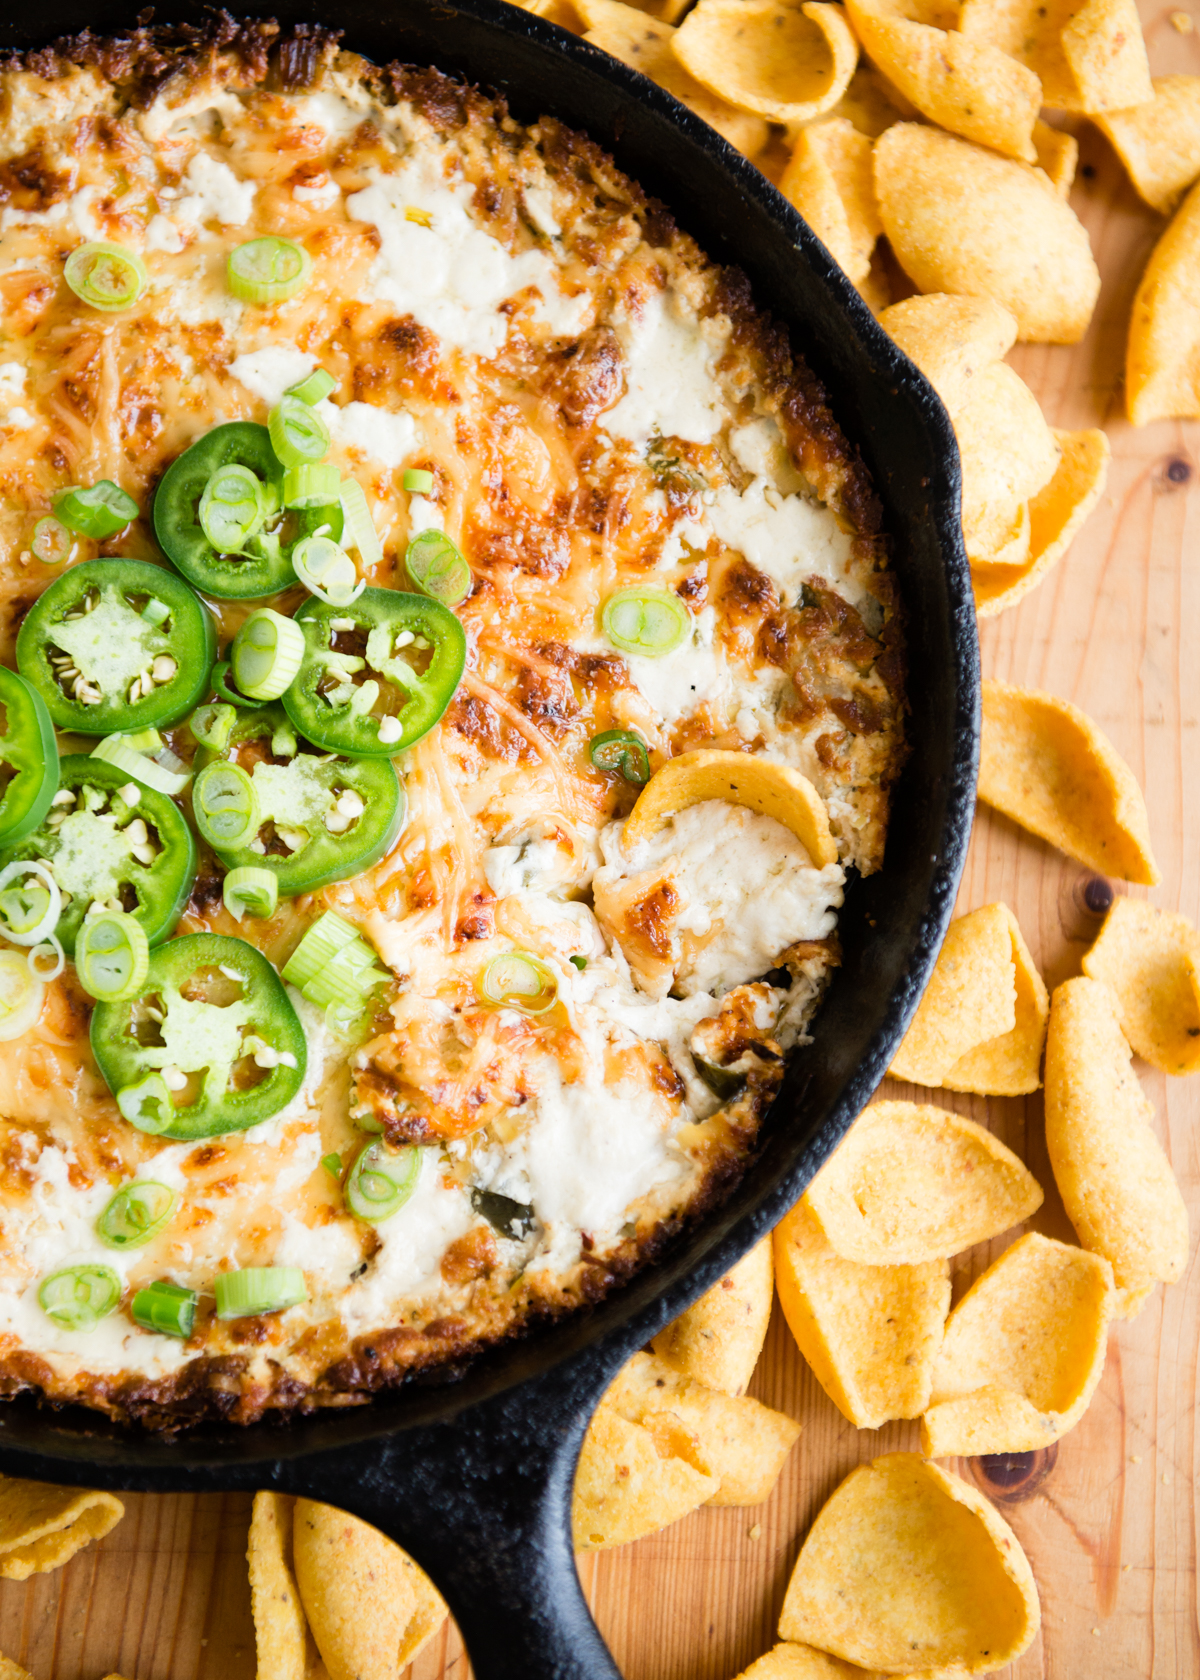 Hot and Bubbly Jalapeño Artichoke Dip with Corn Chips | DesignMom.com